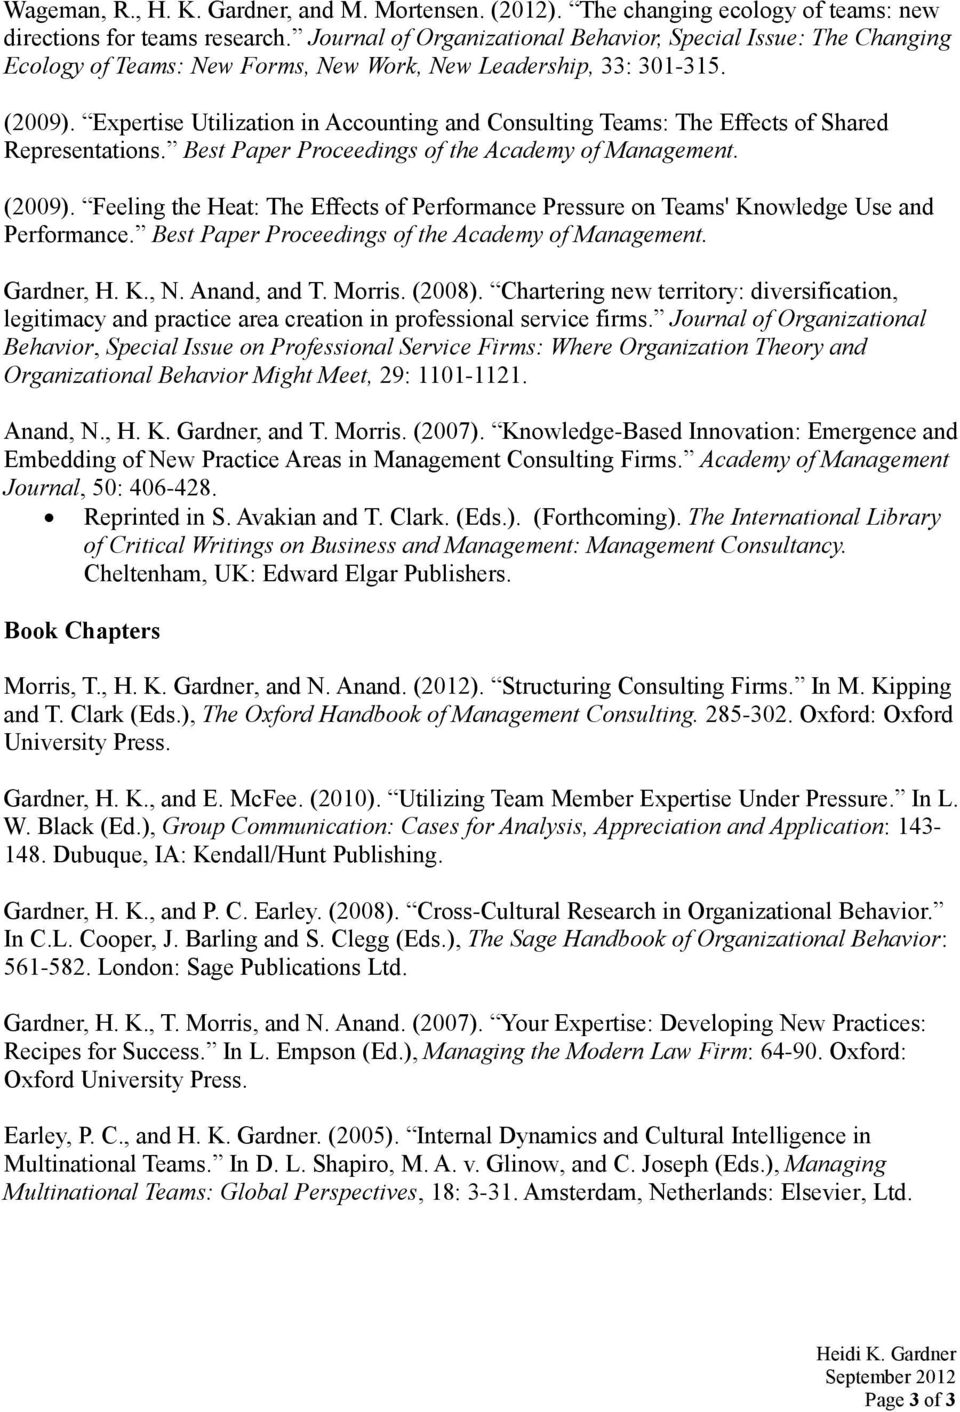 Expertise Utilization in Accounting and Consulting Teams: The Effects of Shared Representations. Best Paper Proceedings of the Academy of Management. (2009).